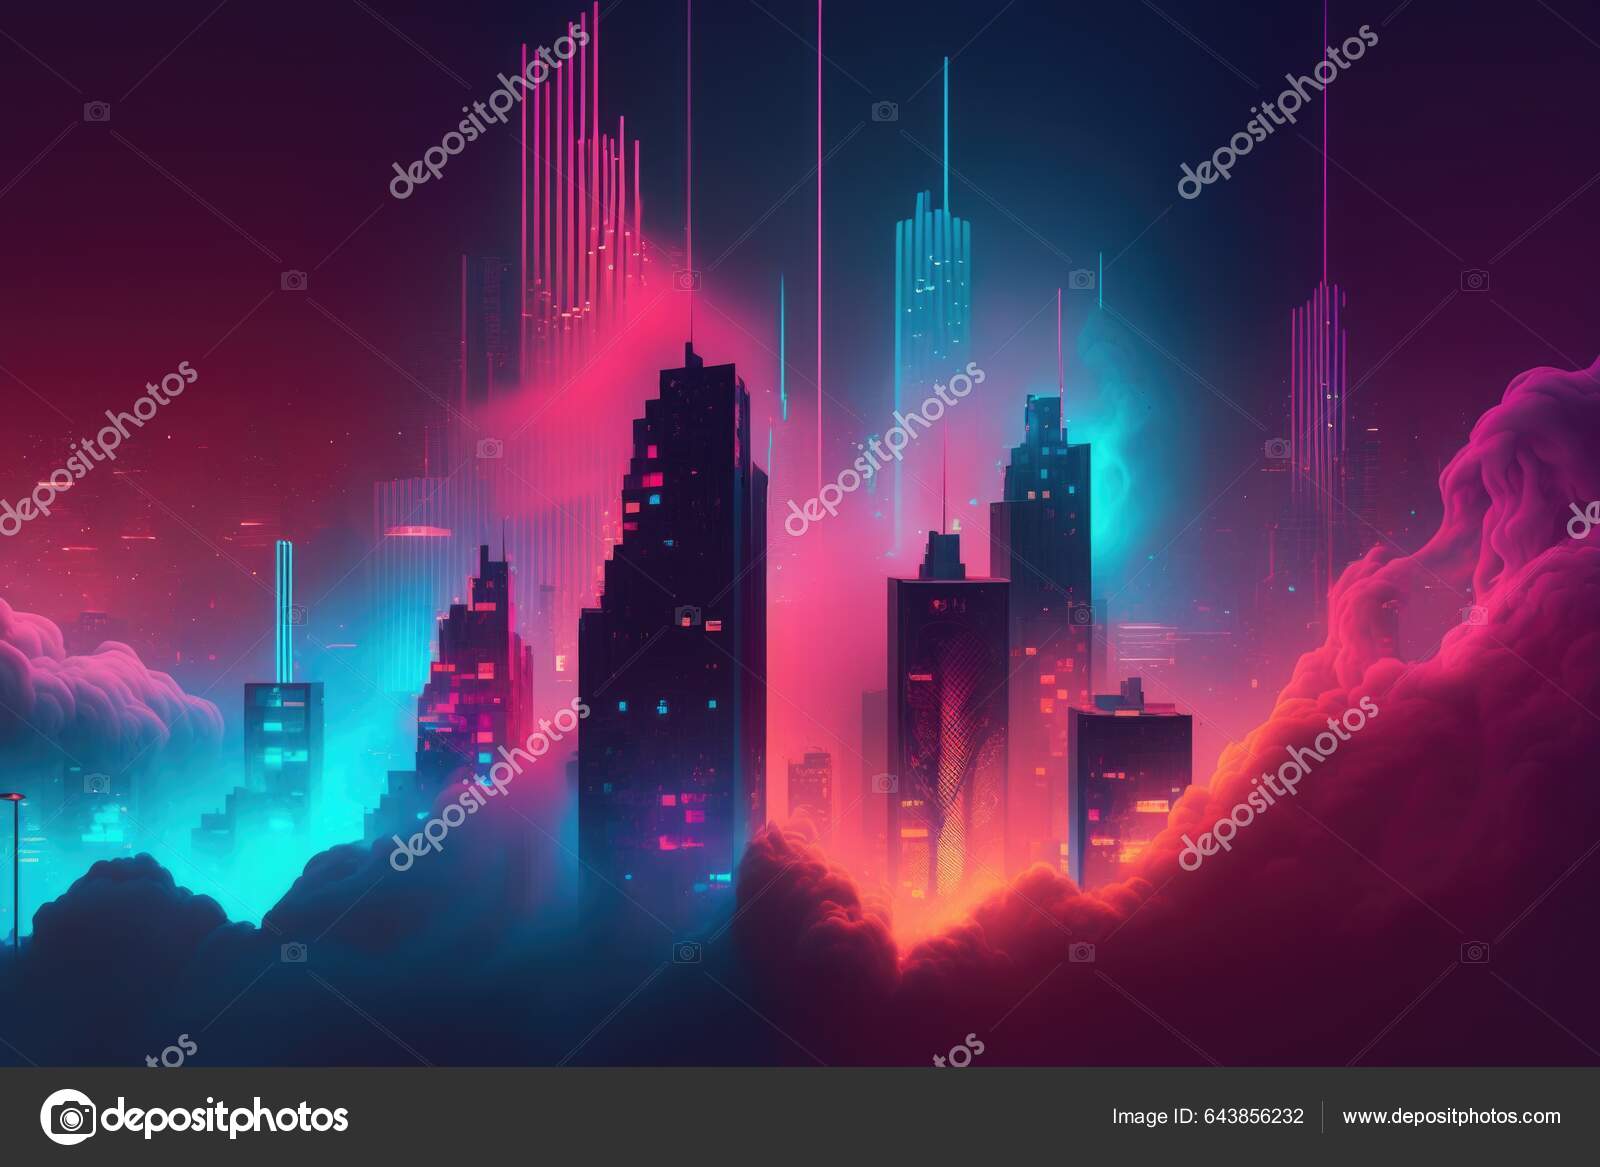 Neon cityscape wallpaper with purple and blue hues